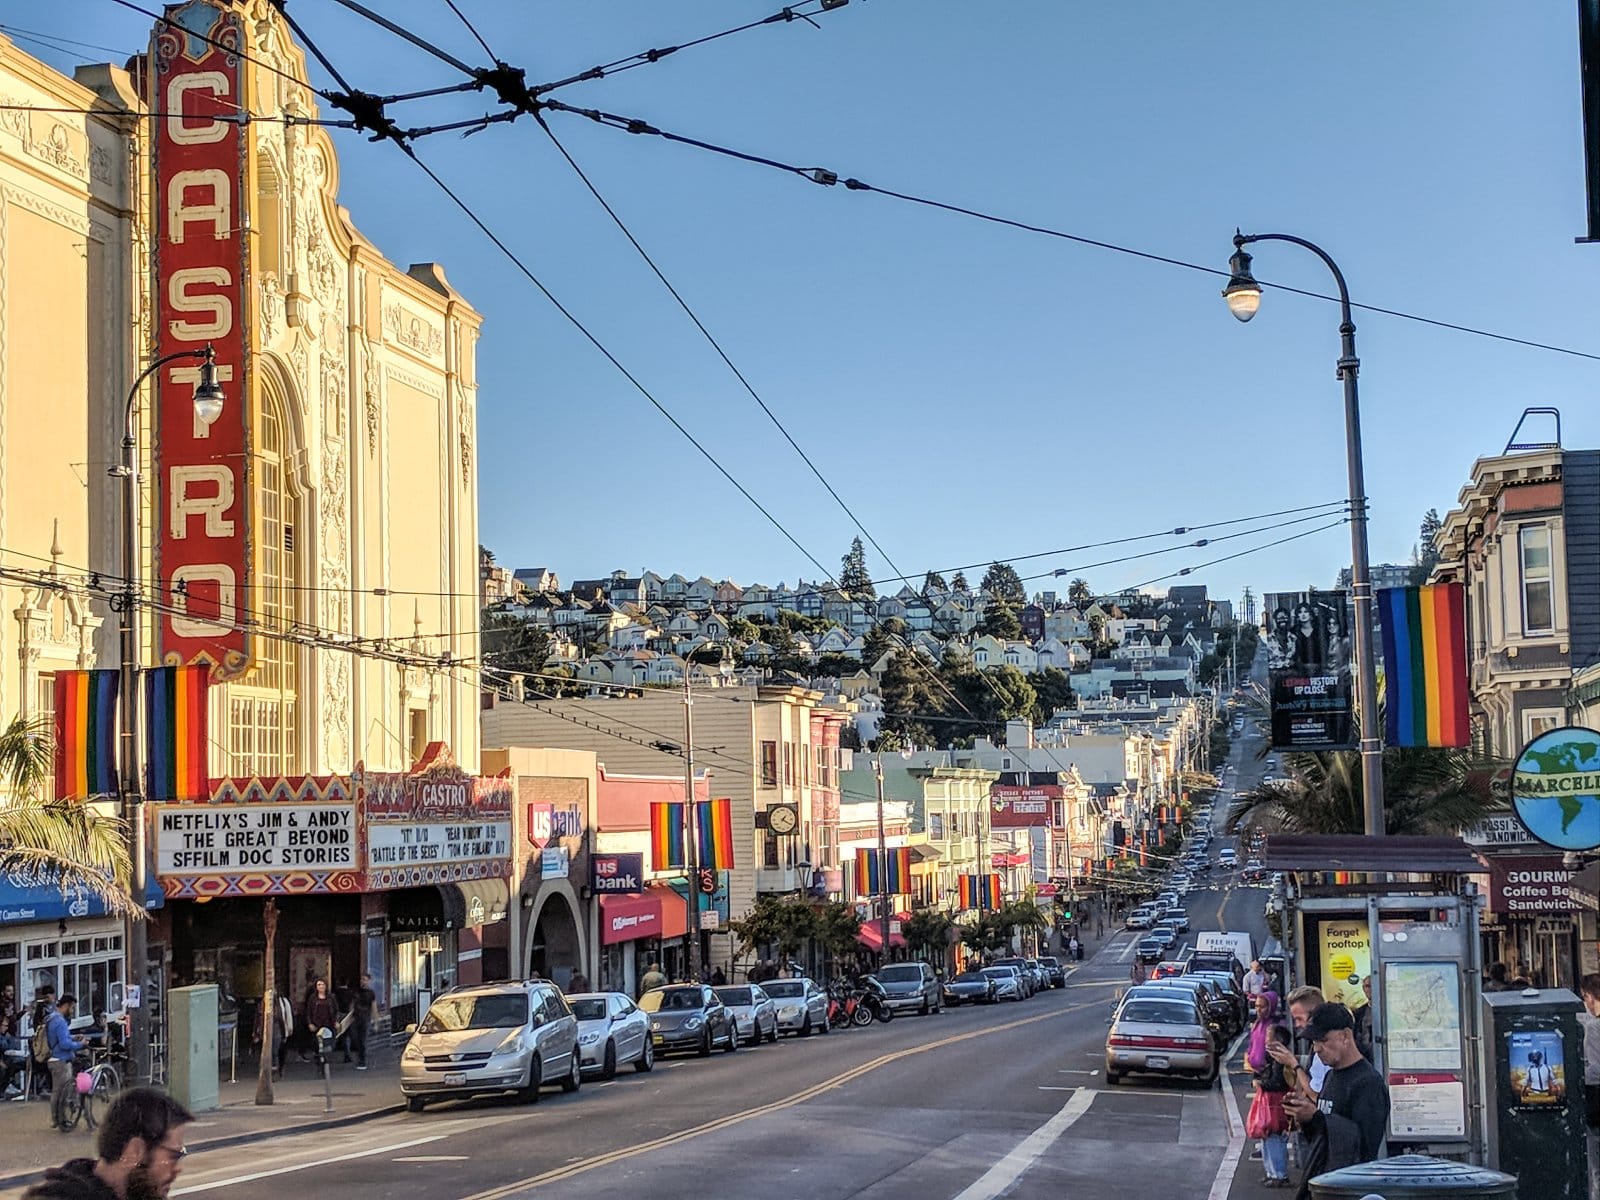 Image Credit: Shutterstock / eddie-hernandez.com <p><span>San Francisco’s Castro District is one of the first gay neighbourhoods in the United States. It became an LGBTQ+ haven in the 1970s and remains a vibrant community hub. Visitors can explore landmarks such as Harvey Milk’s former camera shop, the GLBT Historical Society Museum, and numerous memorials and plaques dedicated to LGBTQ+ history.</span></p>